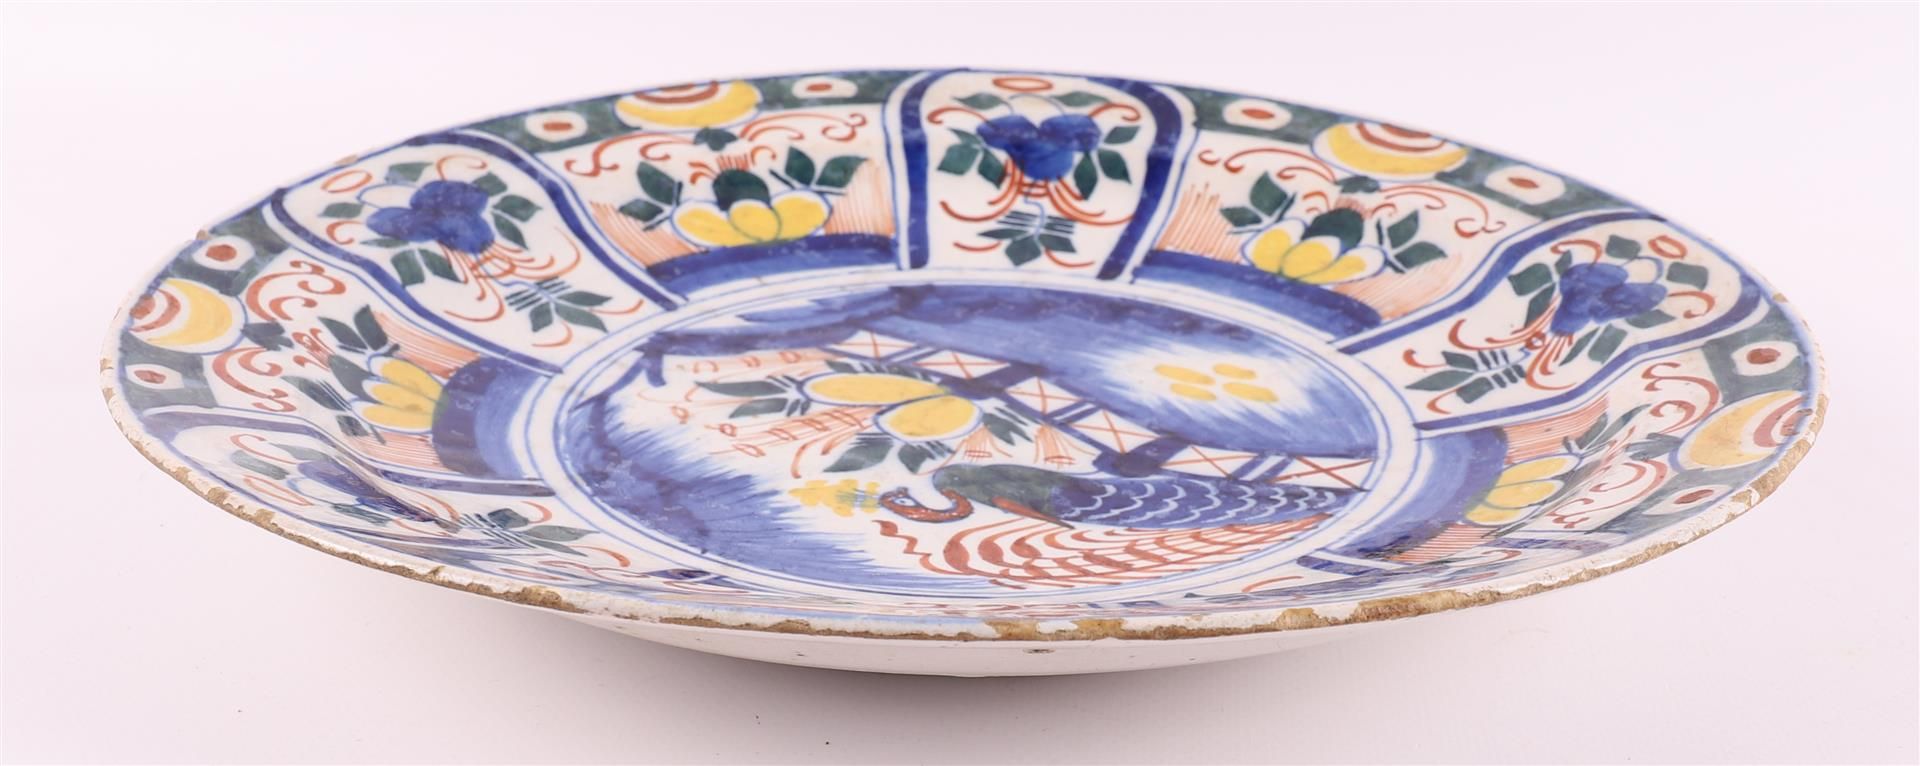 A polychrome Delft earthenware dish, 18th century. - Image 9 of 9